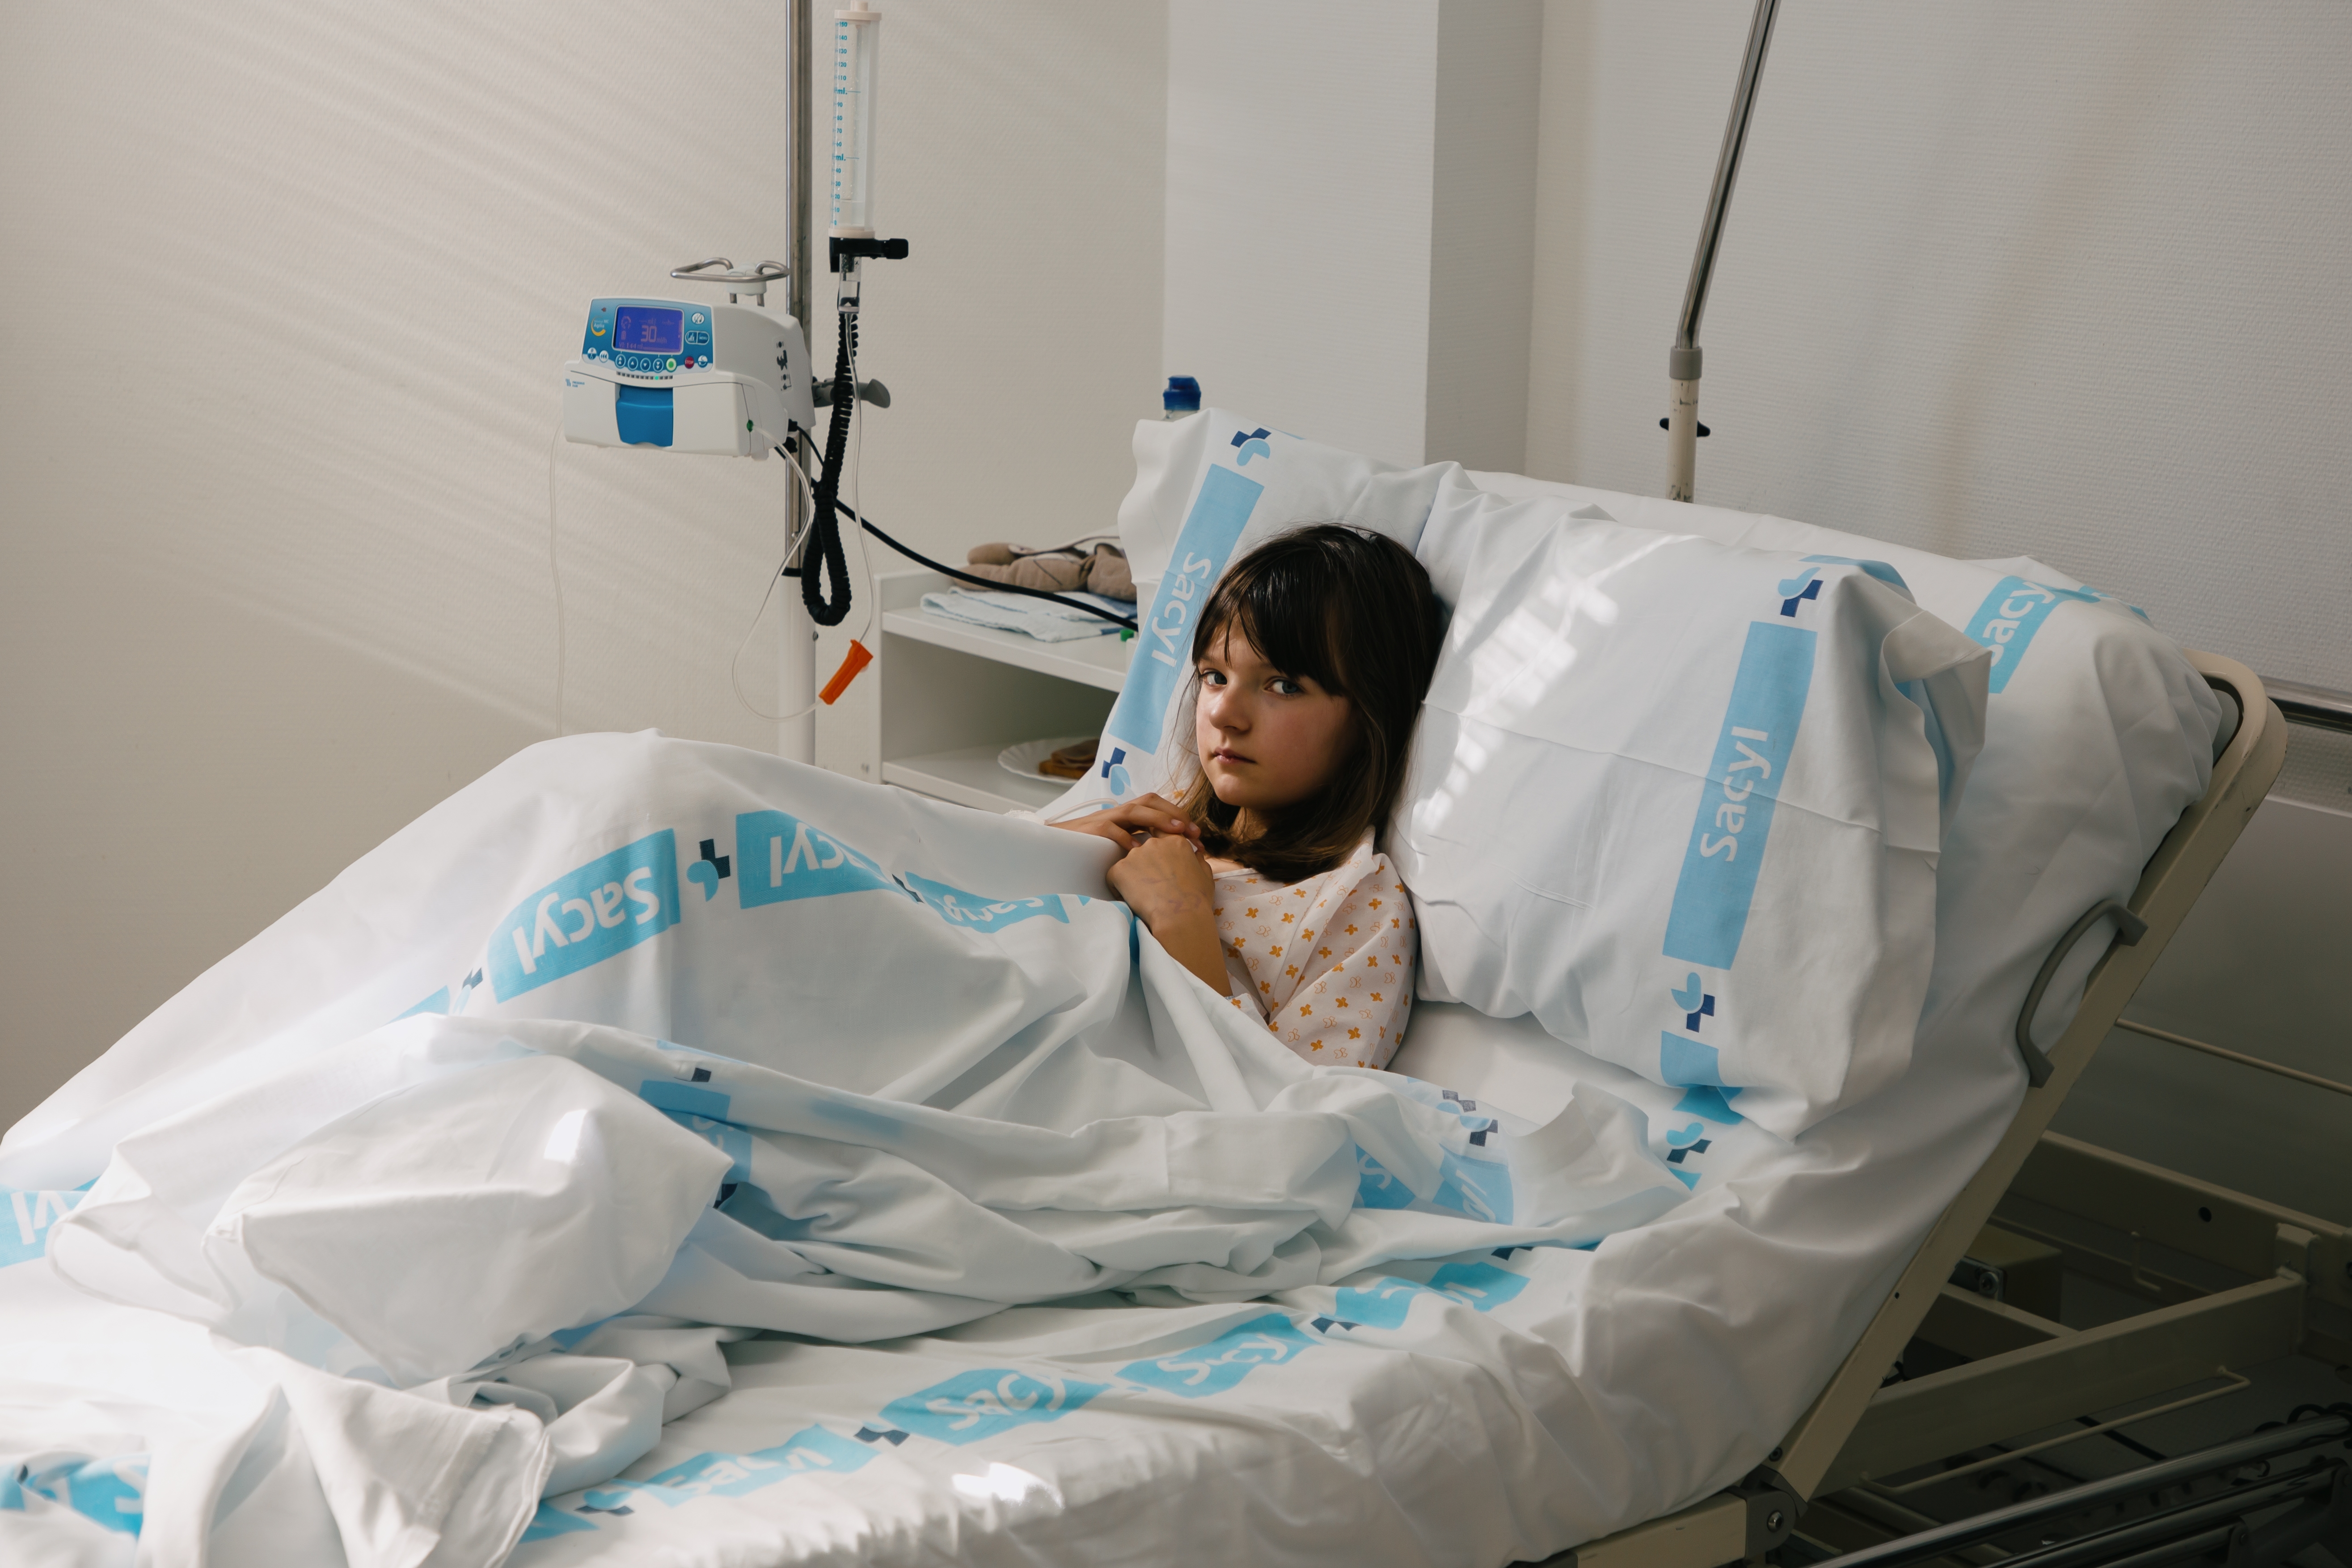 The girl lies on a hospital bed and looks at the camera | Source: Shutterstock.com